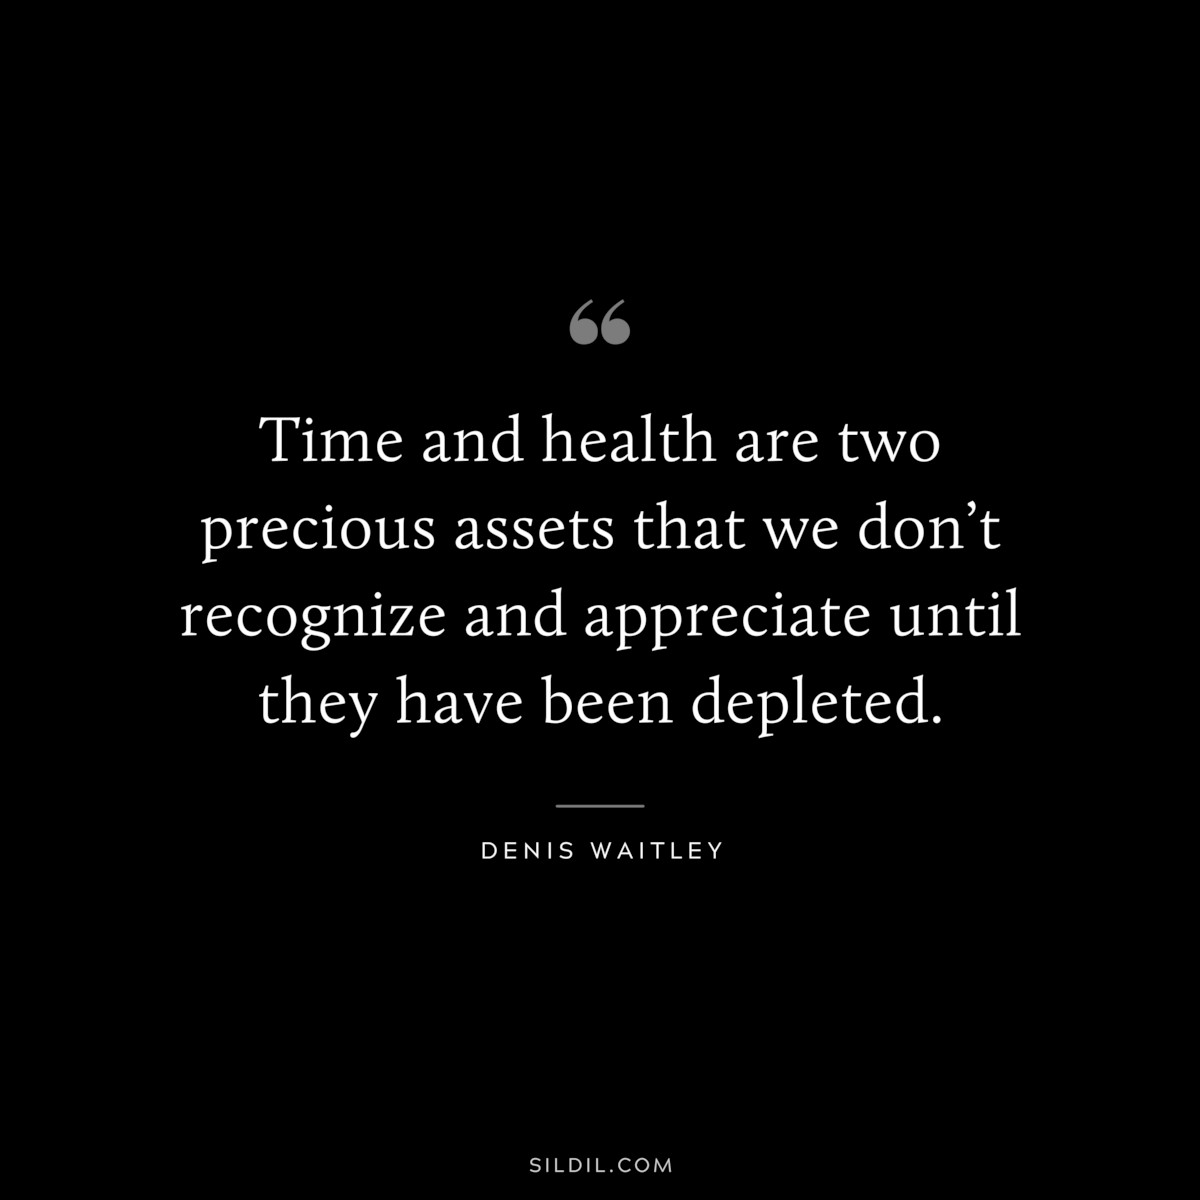 Time and health are two precious assets that we don’t recognize and appreciate until they have been depleted. ― Denis Waitley